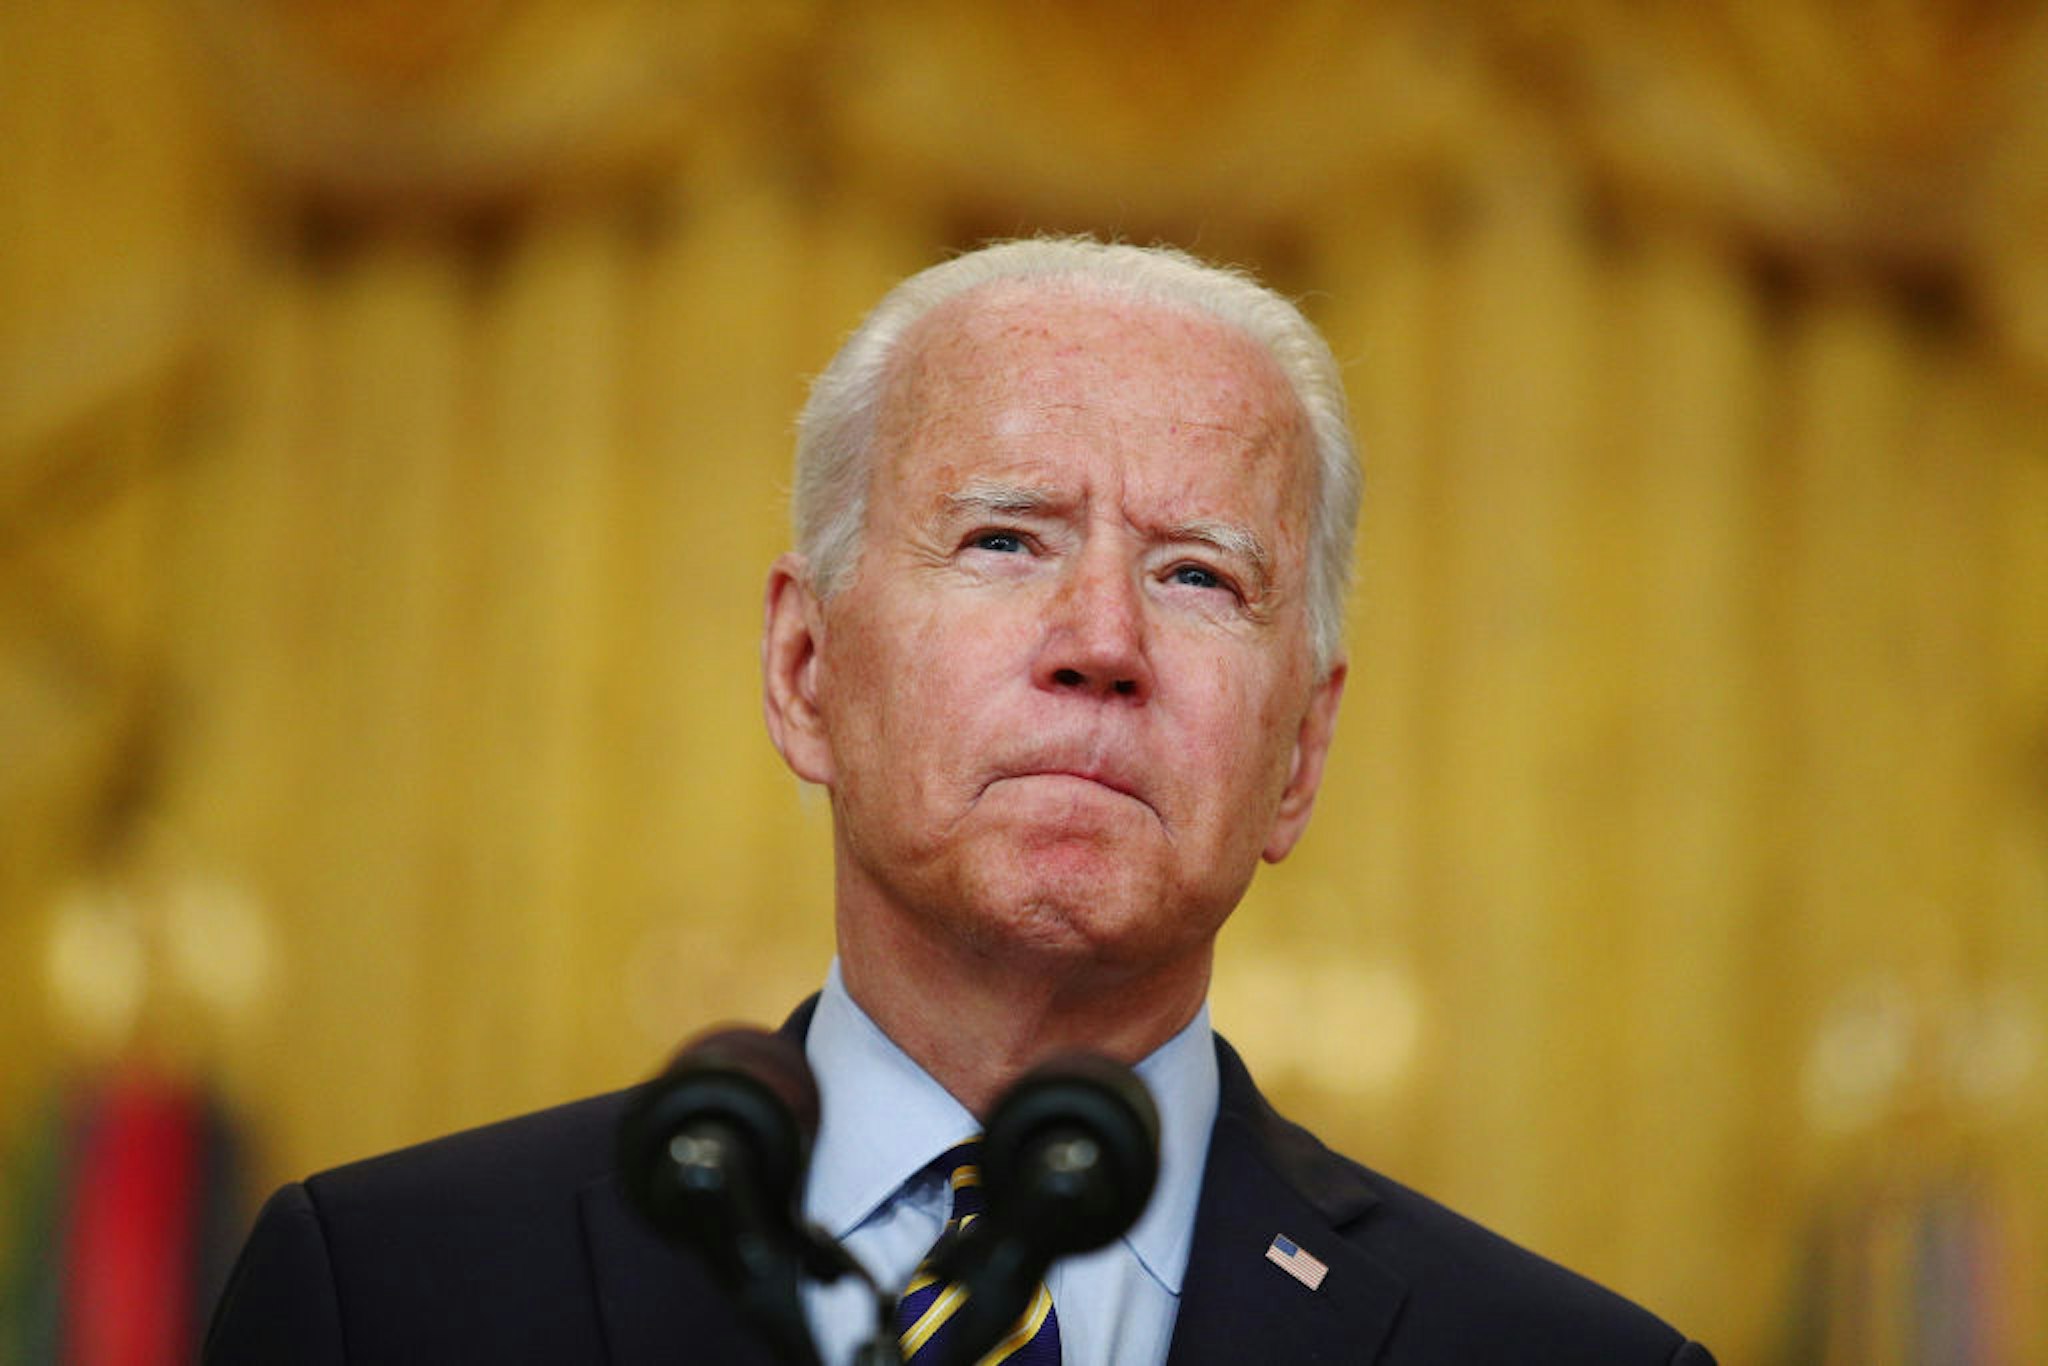 U.S. President Joe Biden pauses while speaking in the East Room of the White House in Washington, D.C., U.S., on Thursday, July 8, 2021. Biden met with security advisers before delivering remarks about the U.S. troop drawdown from Afghanistan, where the Taliban is rapidly advancing on the heels of the U.S. departure. Photographer: Tom Brenner/Bloomberg via Getty Images